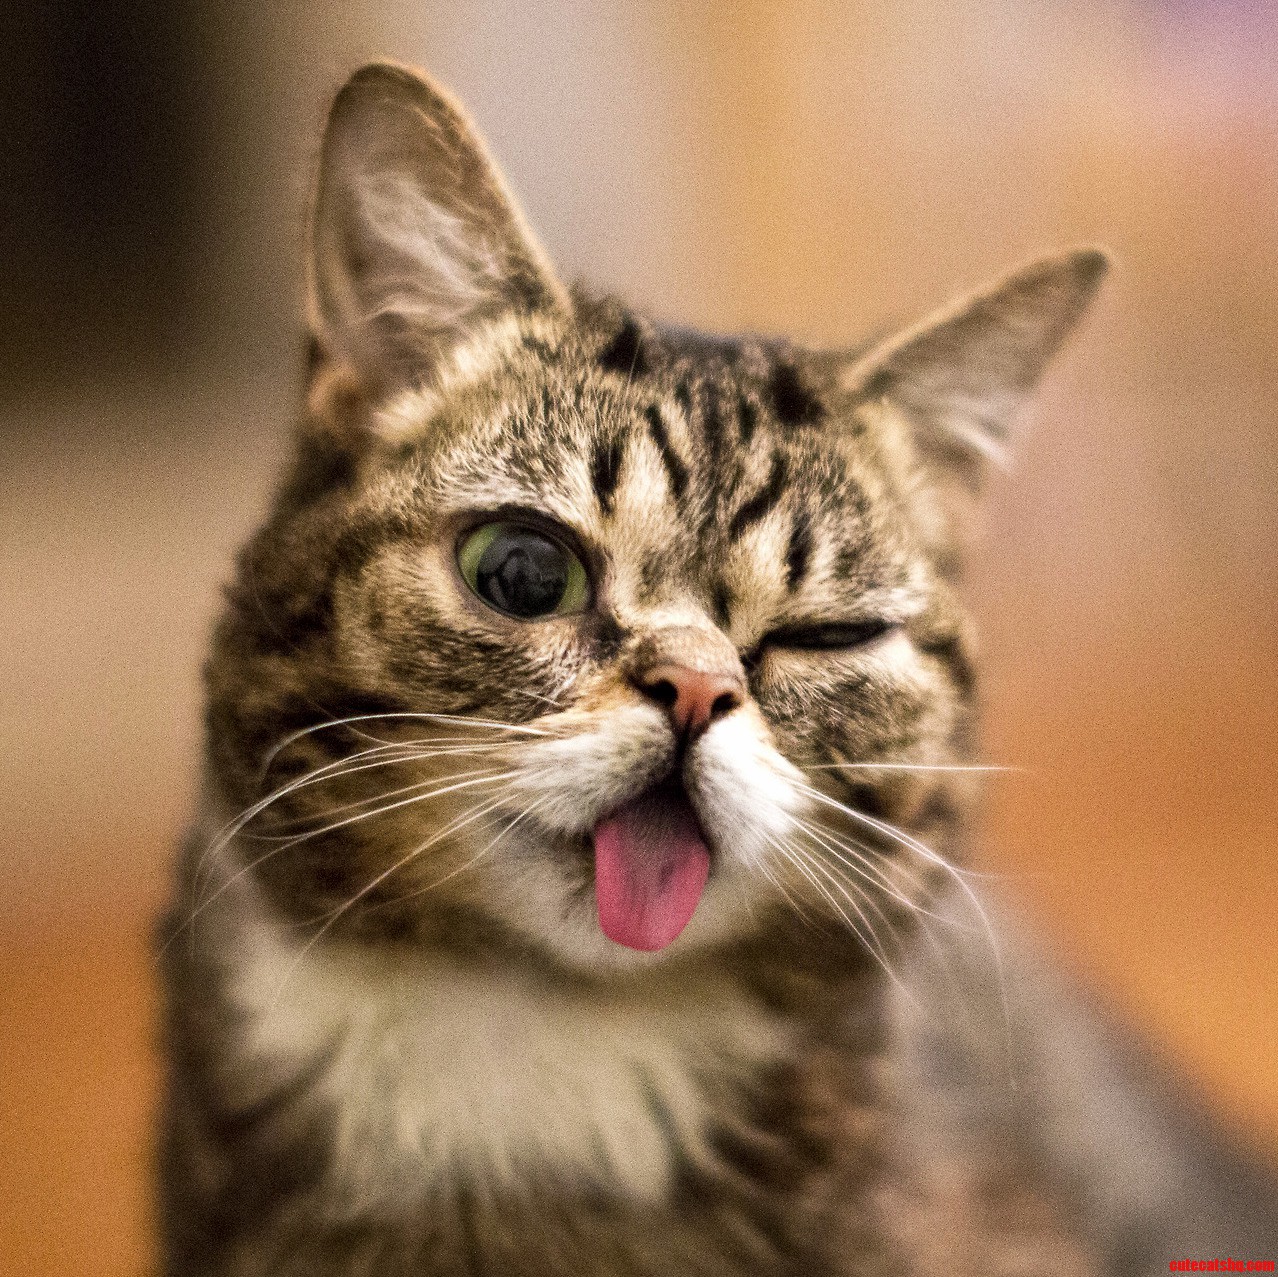 Have You Met Lil Bub